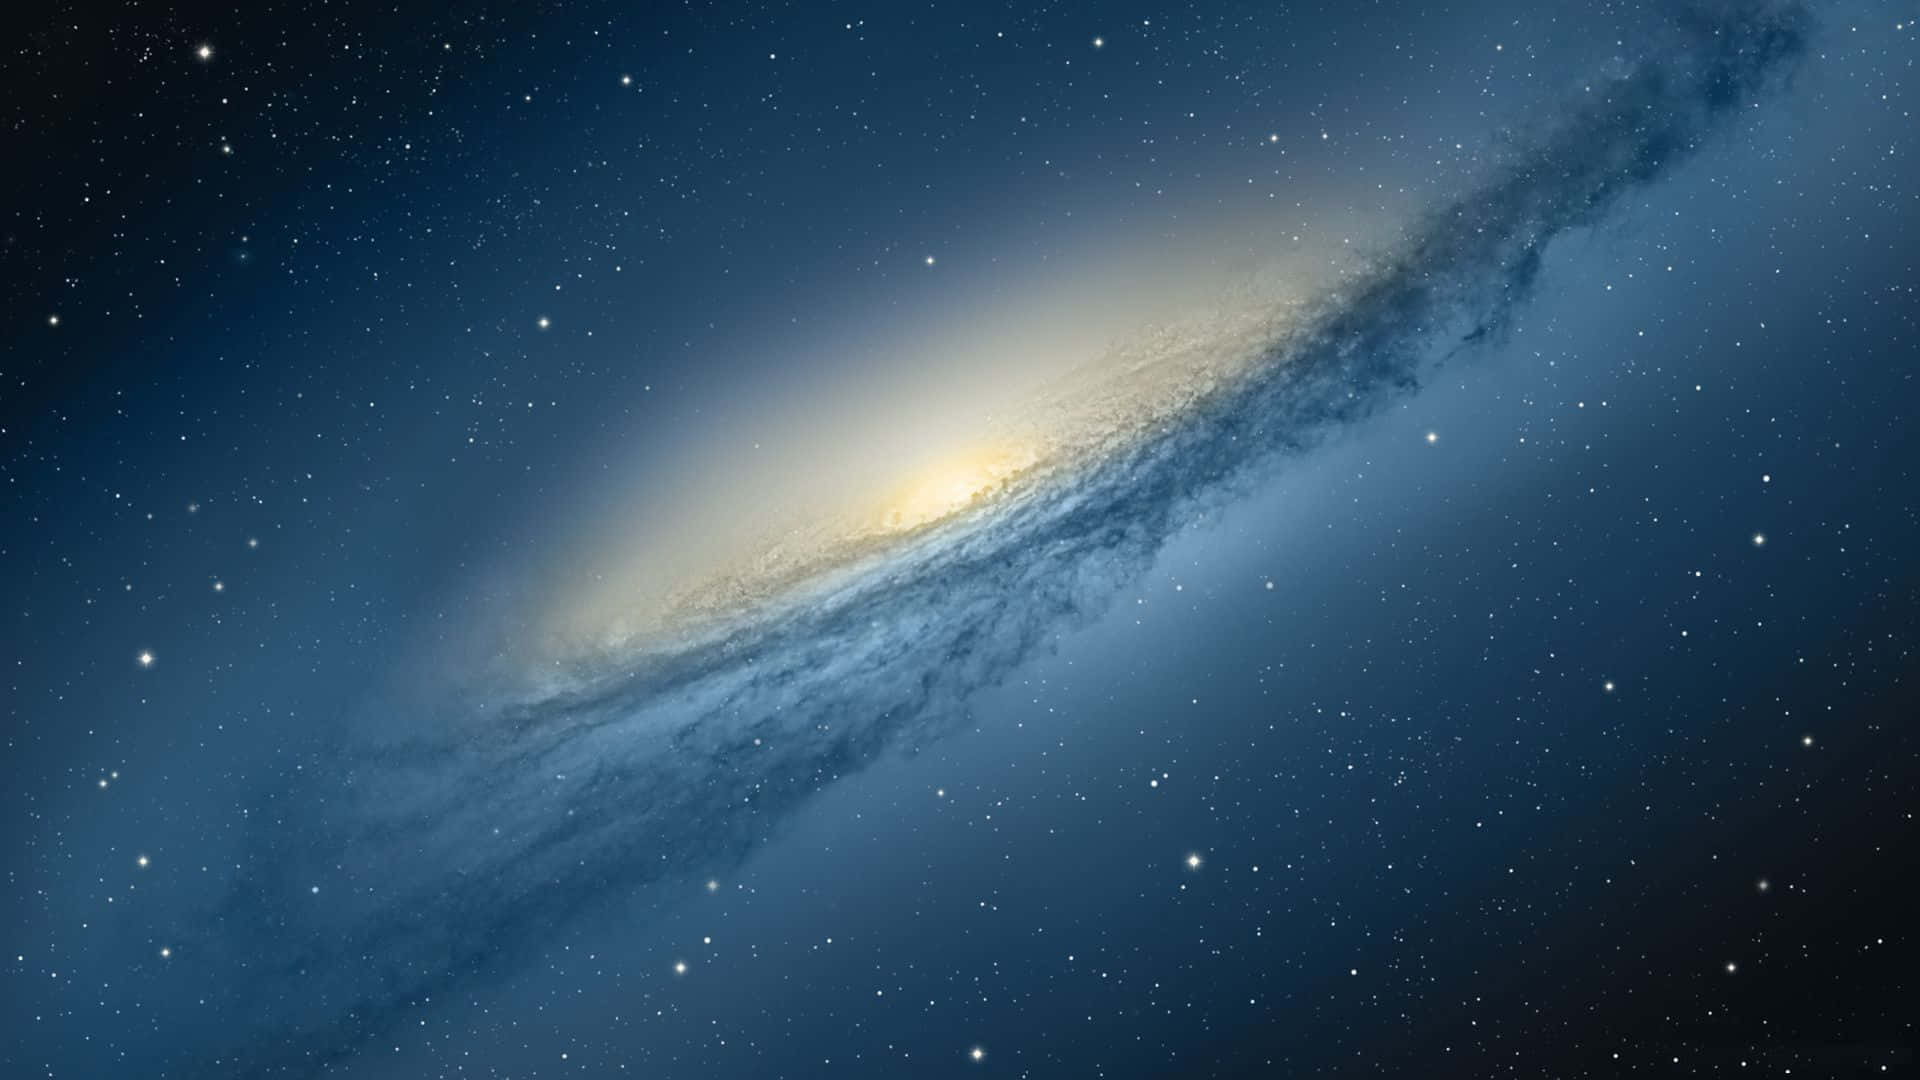 "A breathtaking view of our cosmic neighbor, the Andromeda Galaxy, in 4K resolution." Wallpaper